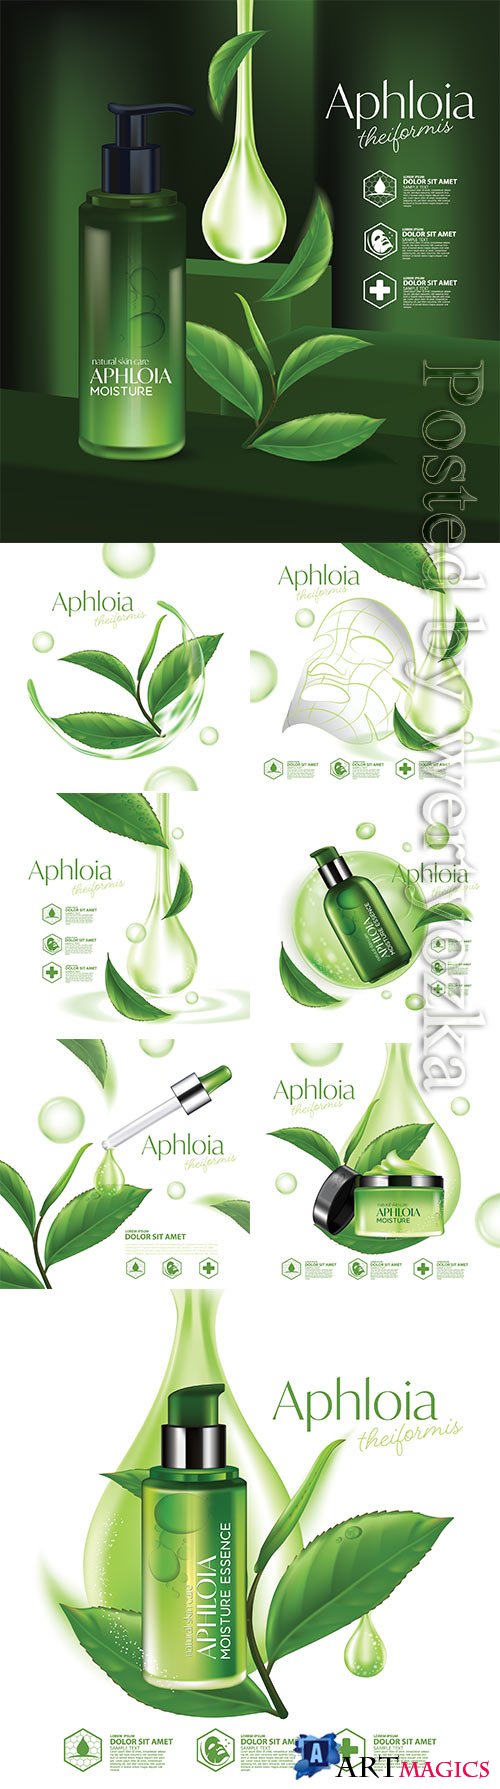 Natural skin care cosmetic vector illustration